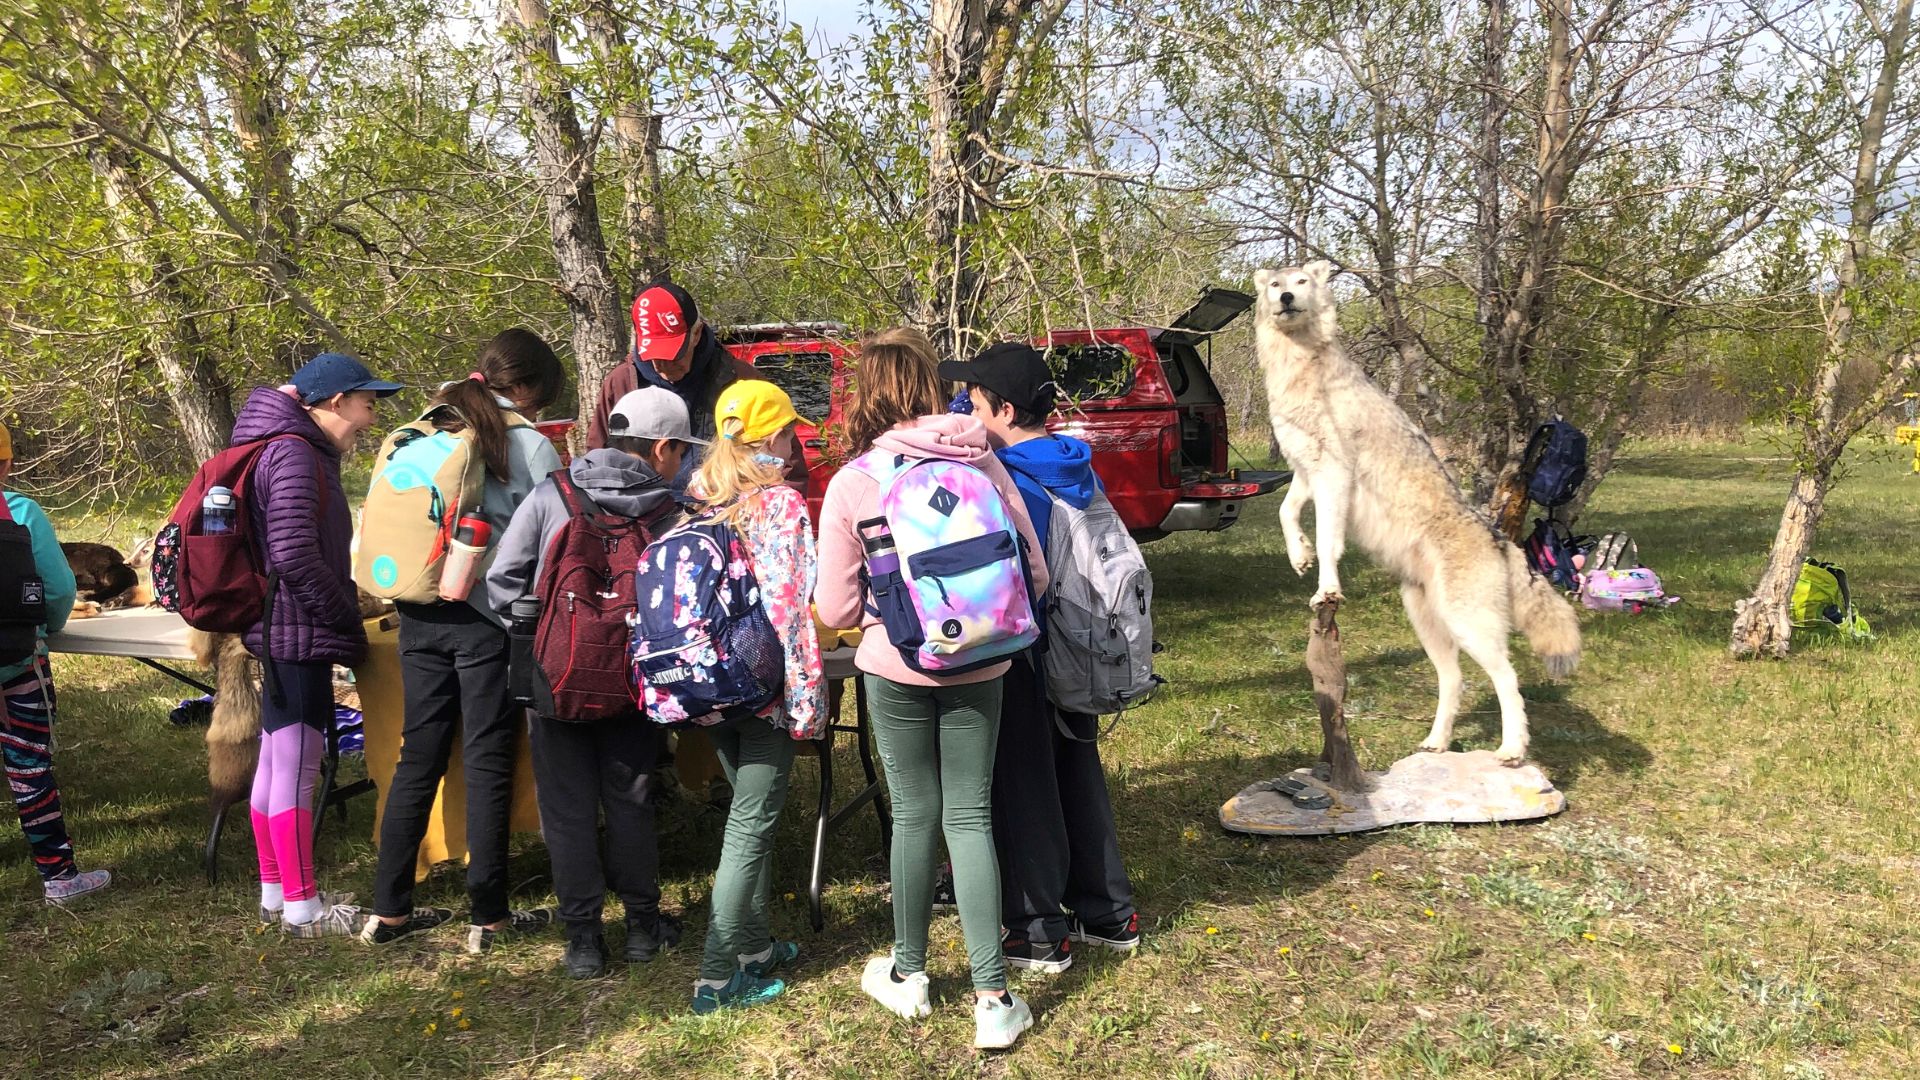 Several children clustered around a teacher or volunteer who is showing them something obscured from view. They are outside by the creek, there is a large taxidermy coyote beside them